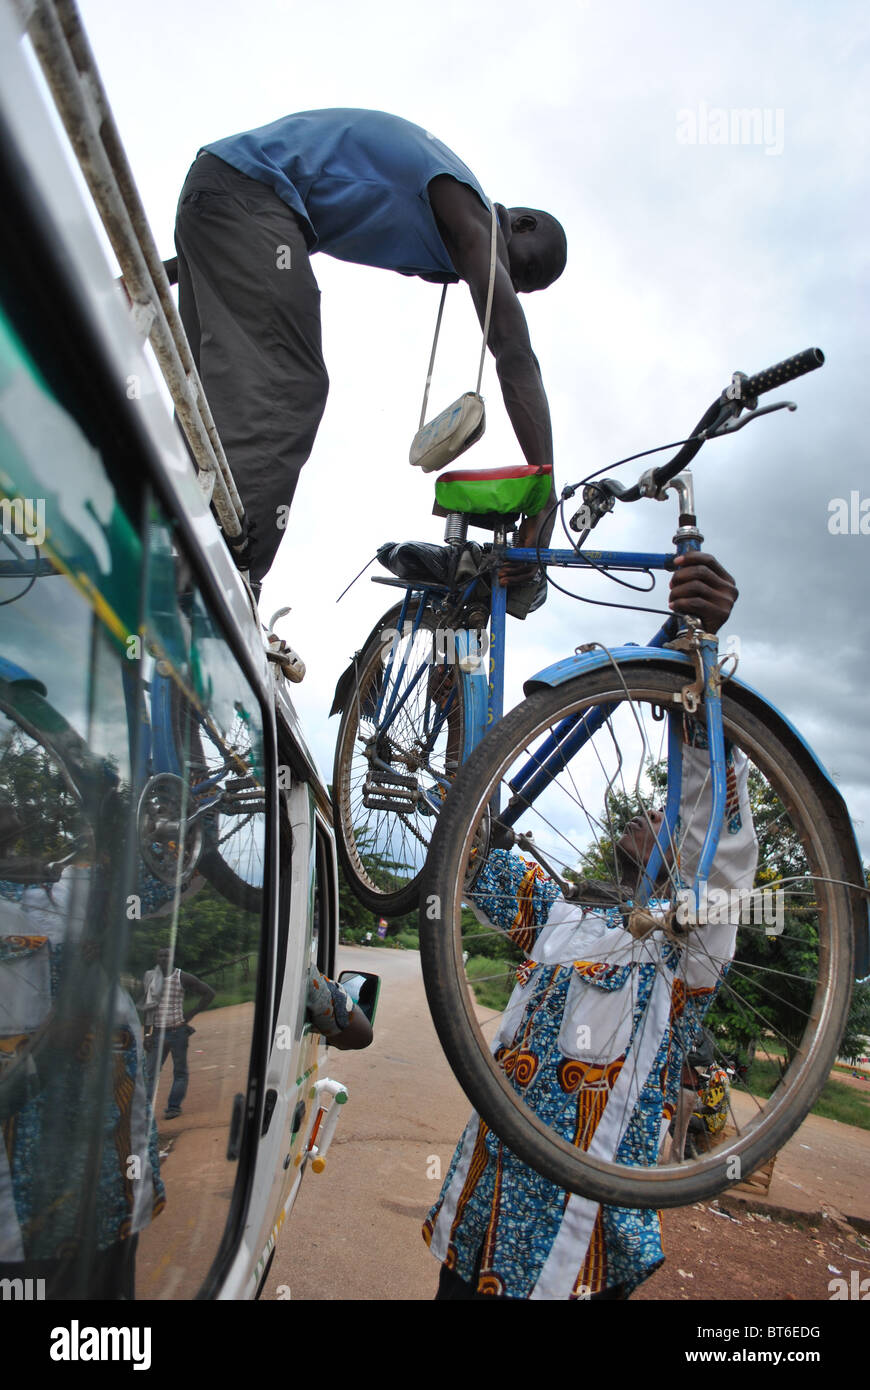 People loading a bicylcle onto the roof of a bush-taxi in Ivory Coast, West Africa Stock Photo